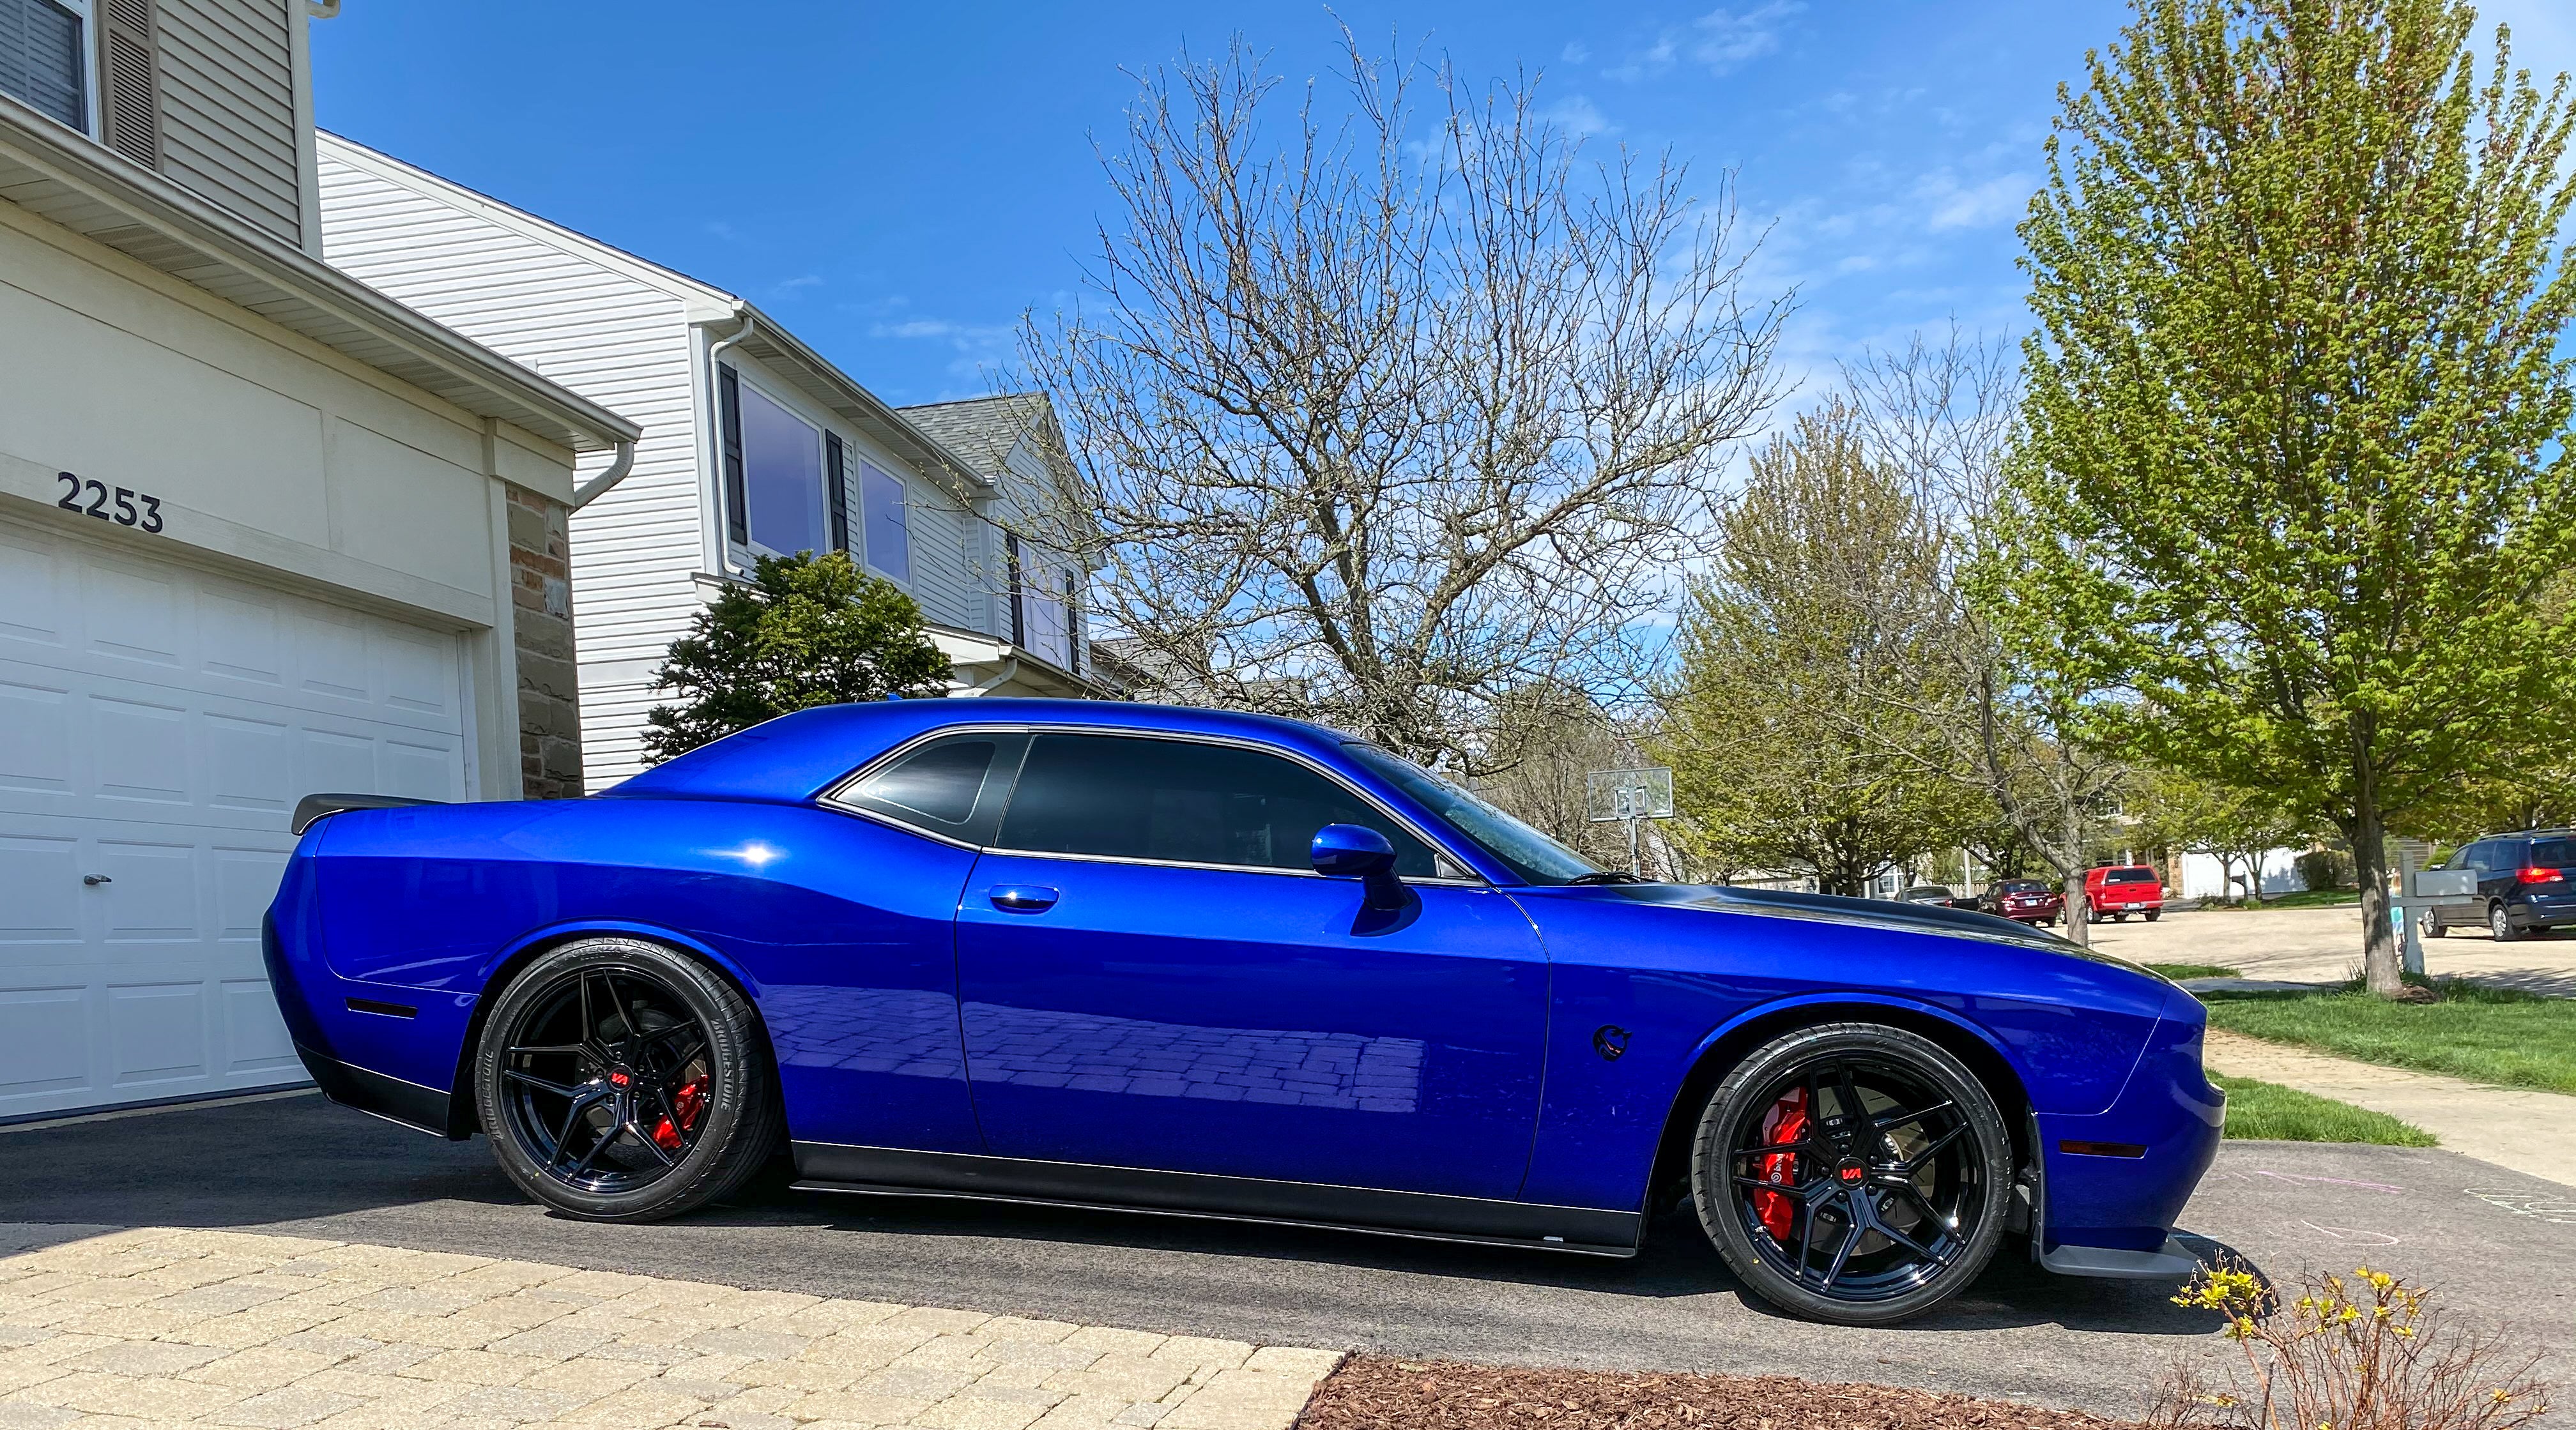 For Sale - 2018 INDIGO BLUE ScatPack Challenger FOR SALE in IL.